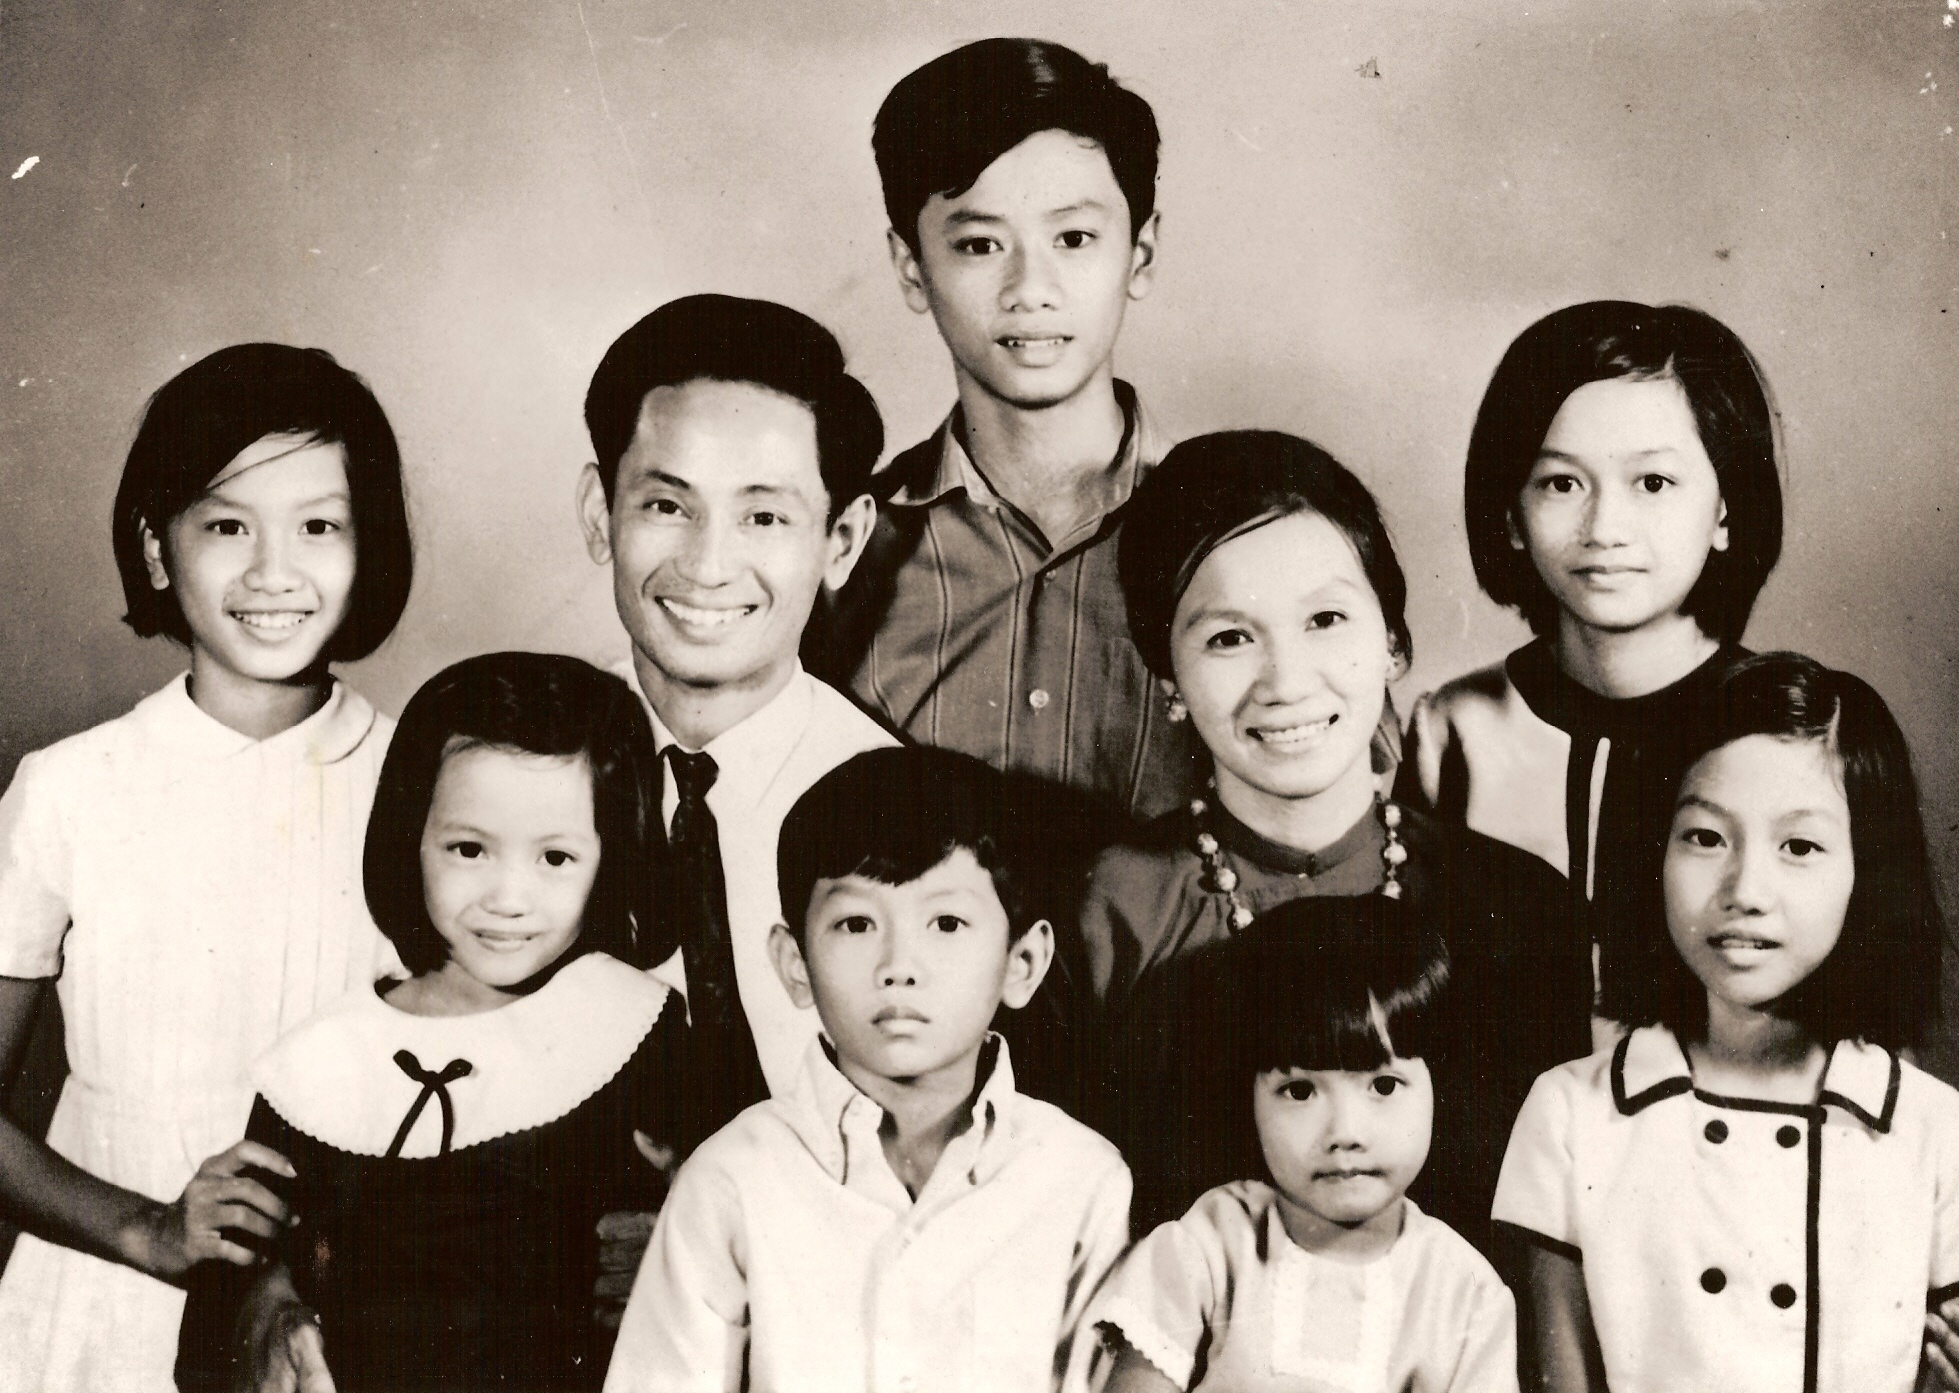  From left to right: Vi Nguyen, Tu&nbsp;(sister), Bong&nbsp;(father), Thiep Nguyen (brother), Khiem&nbsp;(brother), Lan&nbsp;(mother), Tram&nbsp;(sister), Van&nbsp;(sister), Thi (sister). 